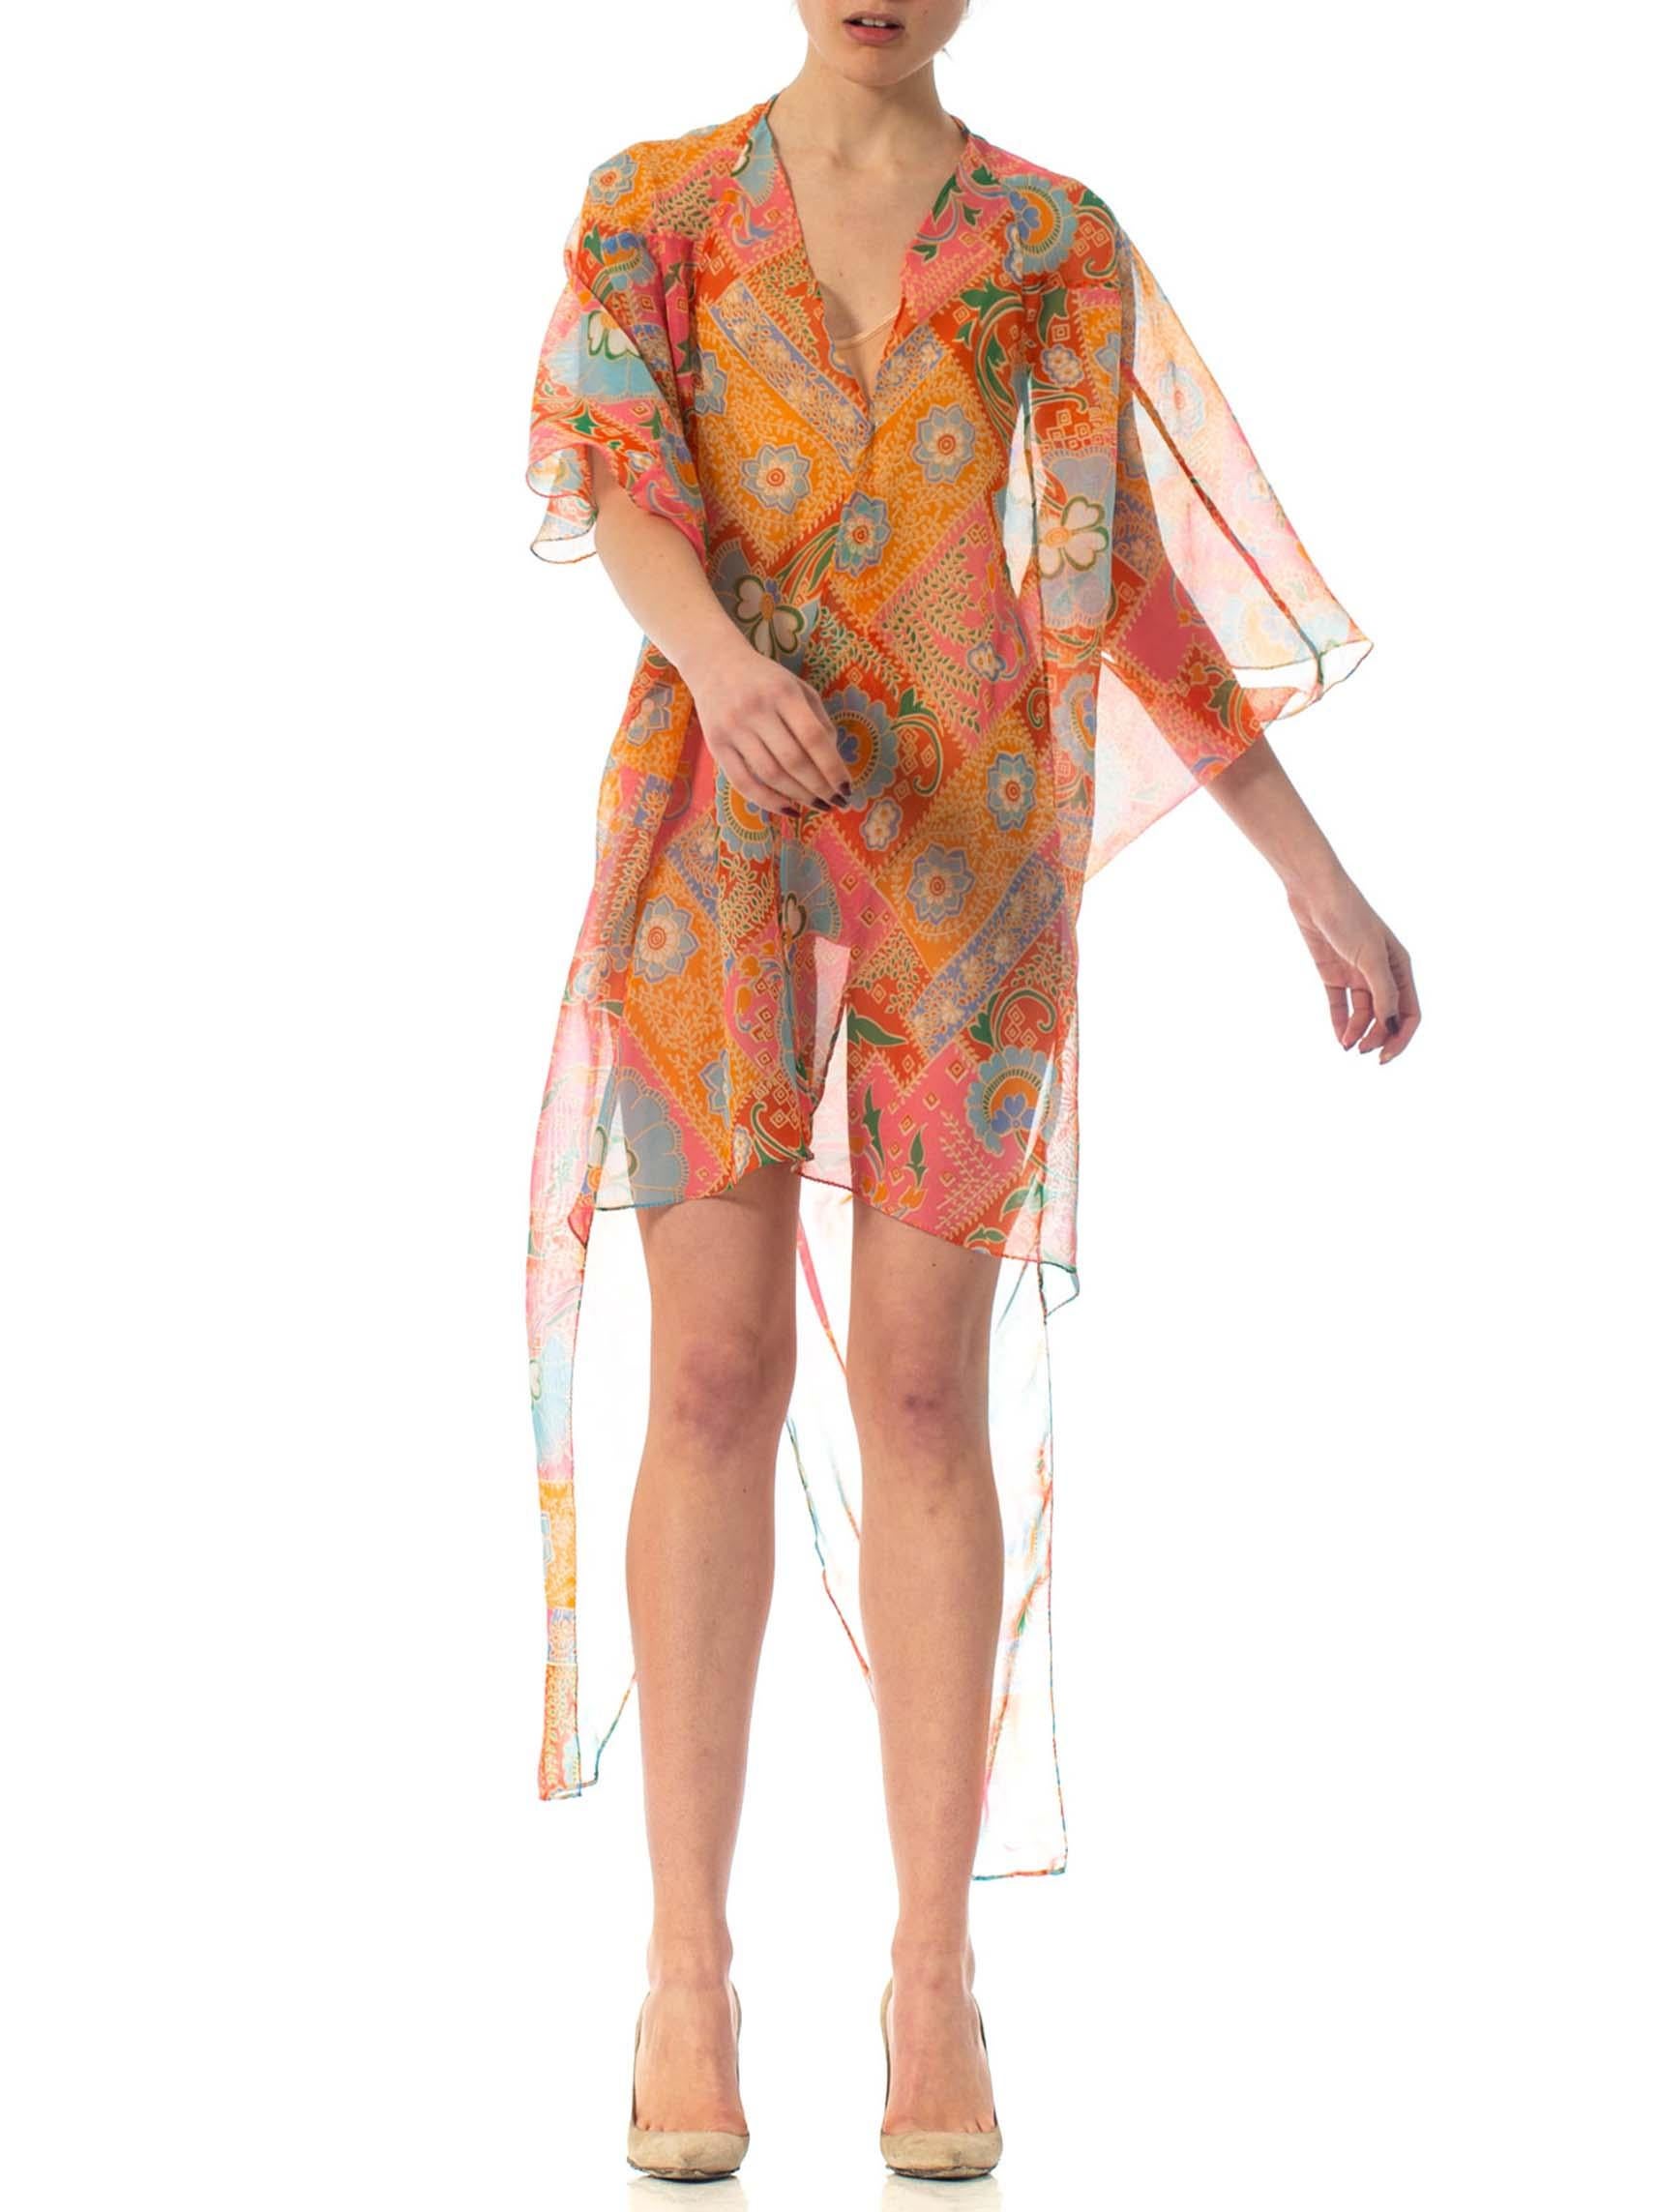 MORPHEW COLLECTION Psychedelic Polyester Organza Beach Cover-Up Cocoon 2